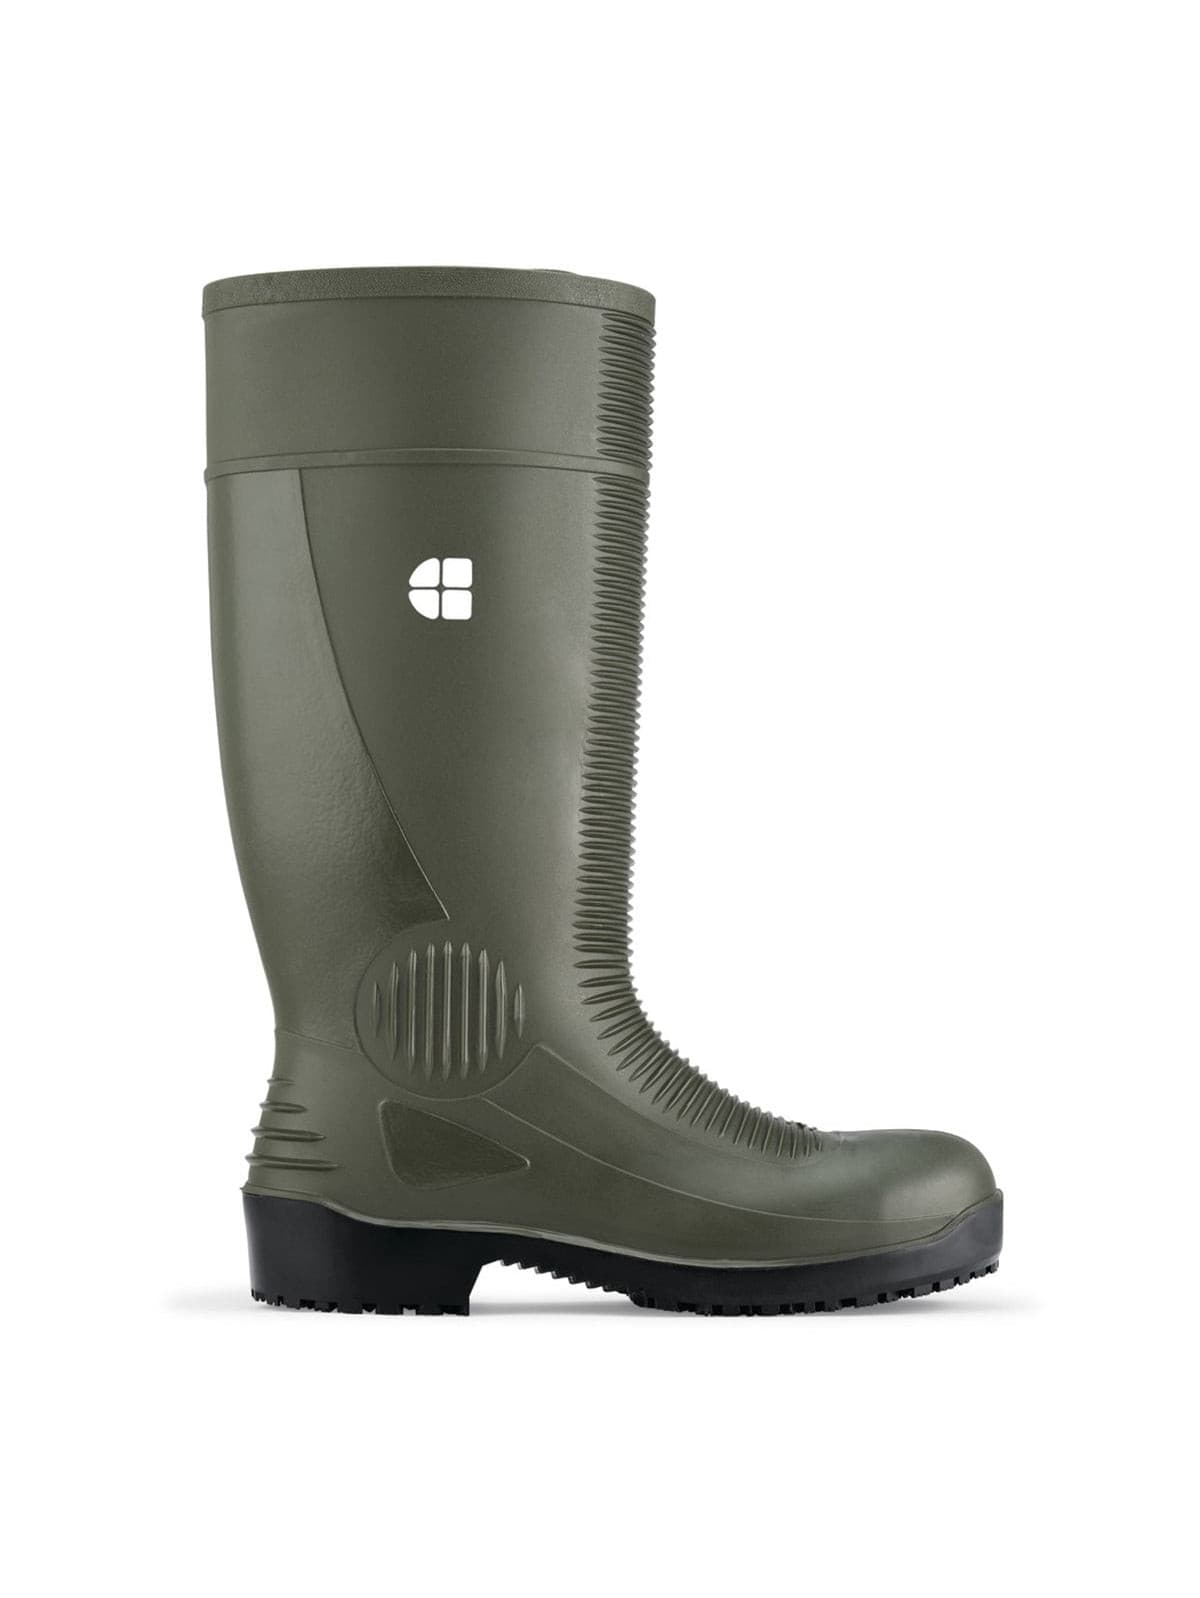 Unisex Safety Boot Bastion Green (S4) by Shoes For Crews -  ChefsCotton